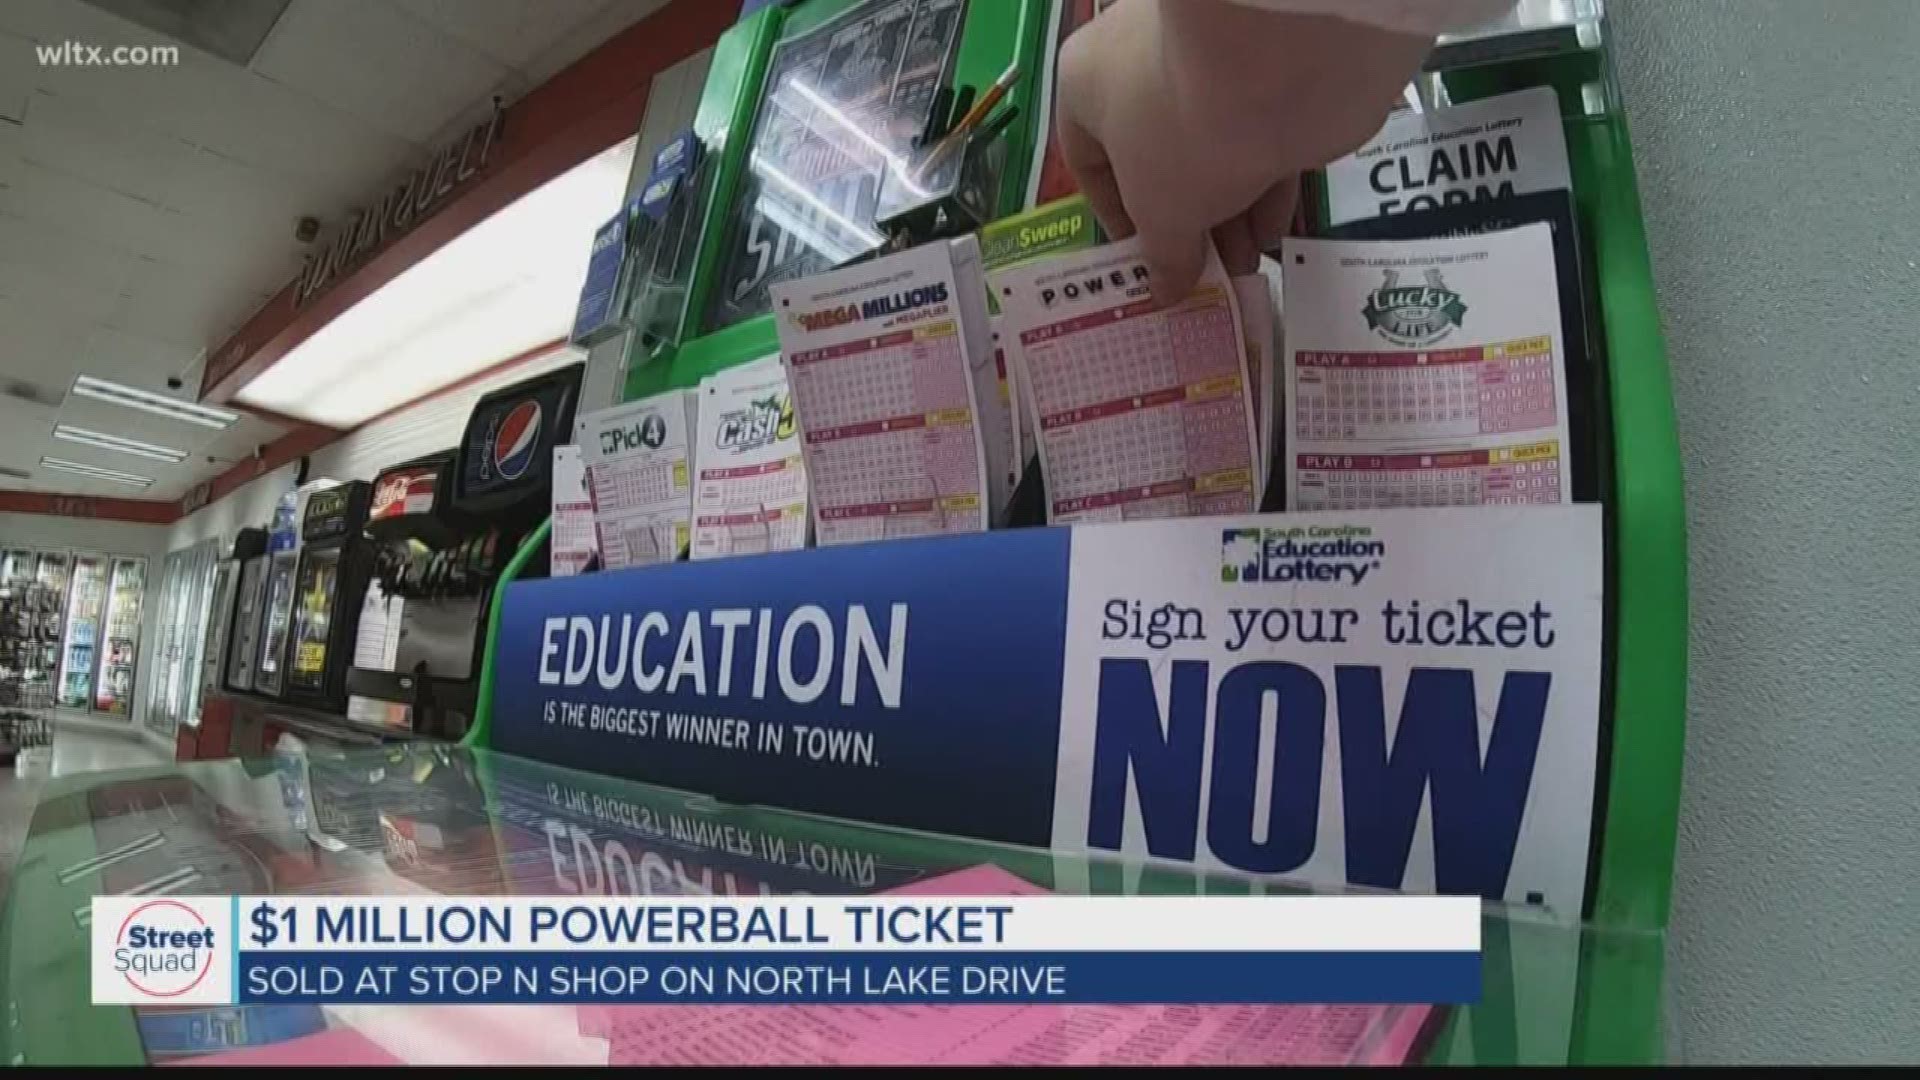 Wednesday night, a lucky SC resident bought a winning Powerball ticket from the Stop-n-Shop on North Lake Drive.